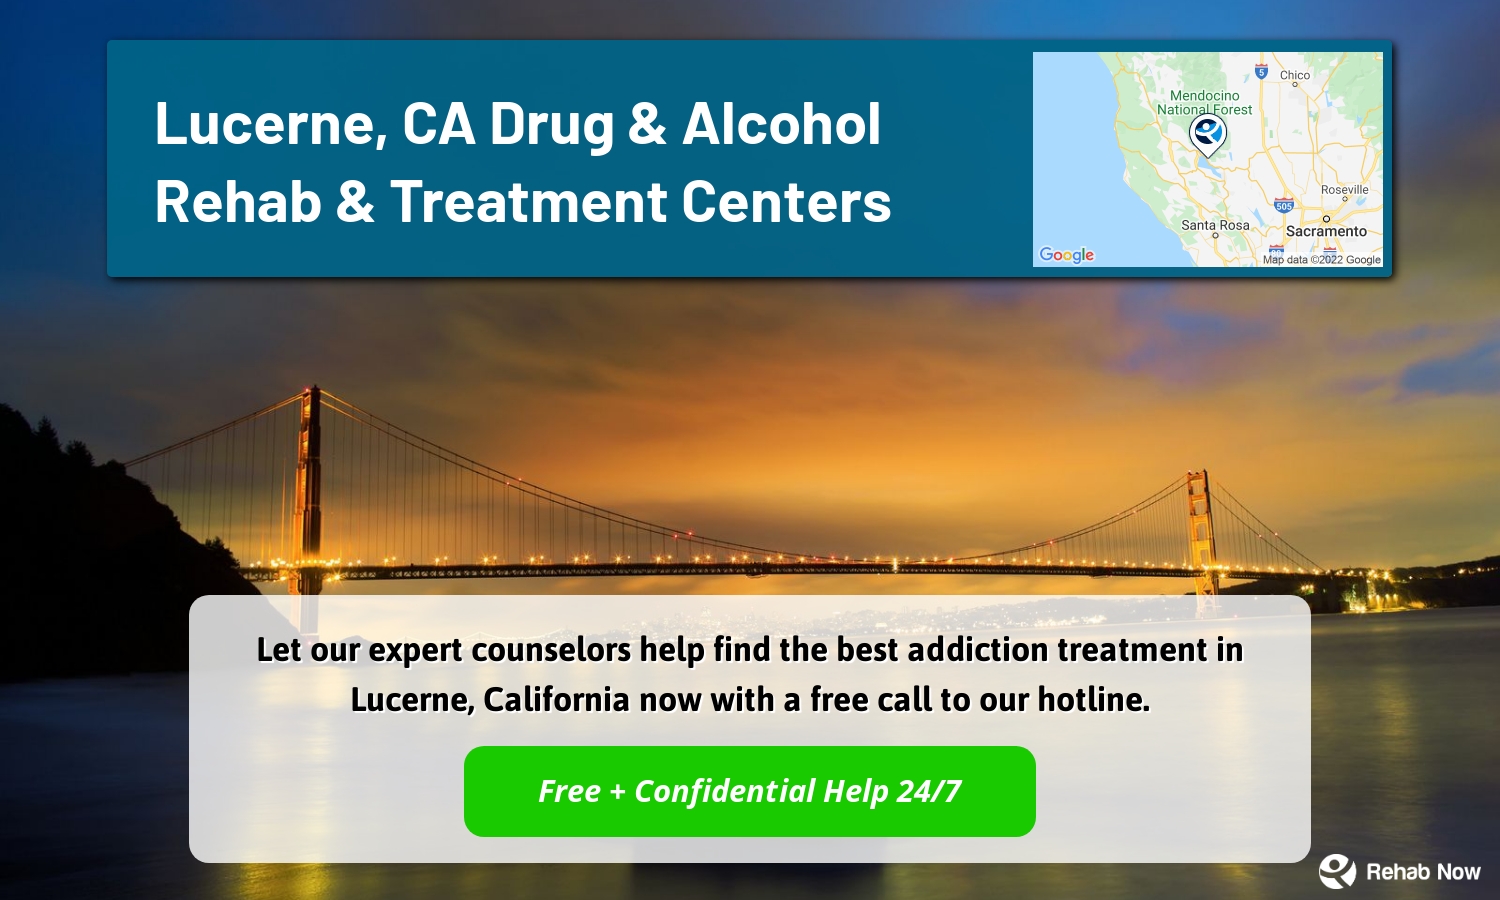 Let our expert counselors help find the best addiction treatment in Lucerne, California now with a free call to our hotline.